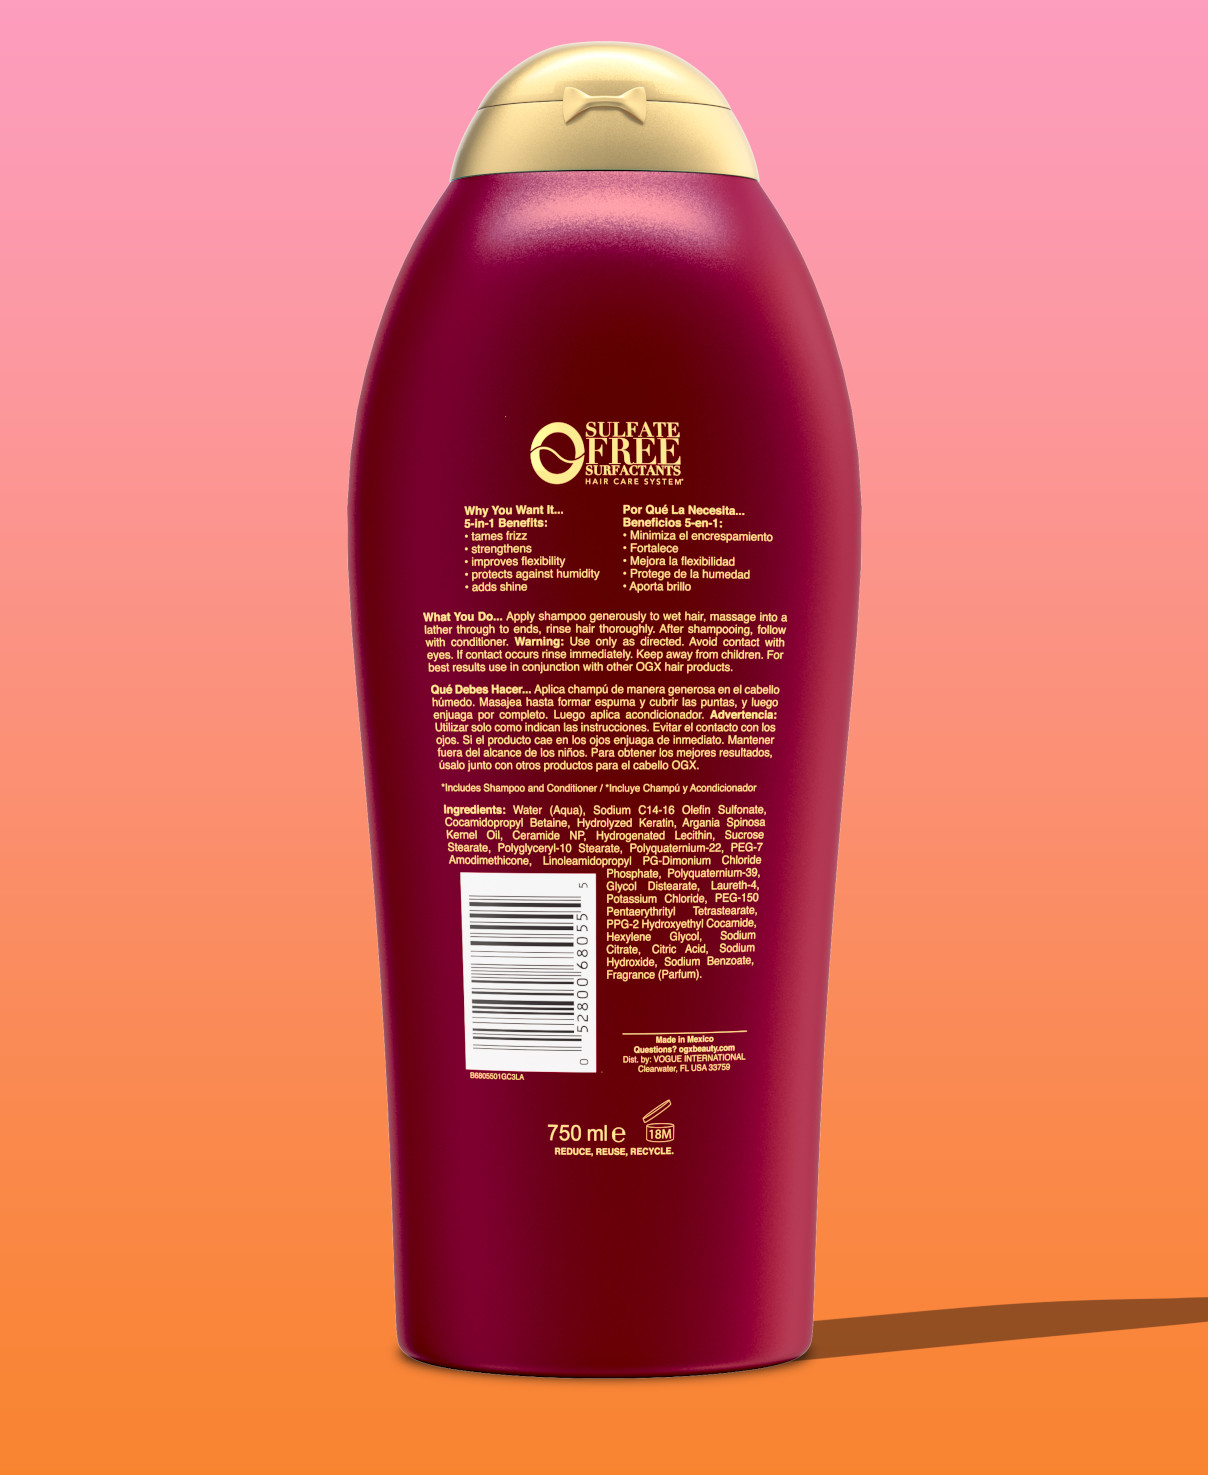 Frizz-Free Keratin Smoothing Oil for Frizzy Hair | OGX Beauty